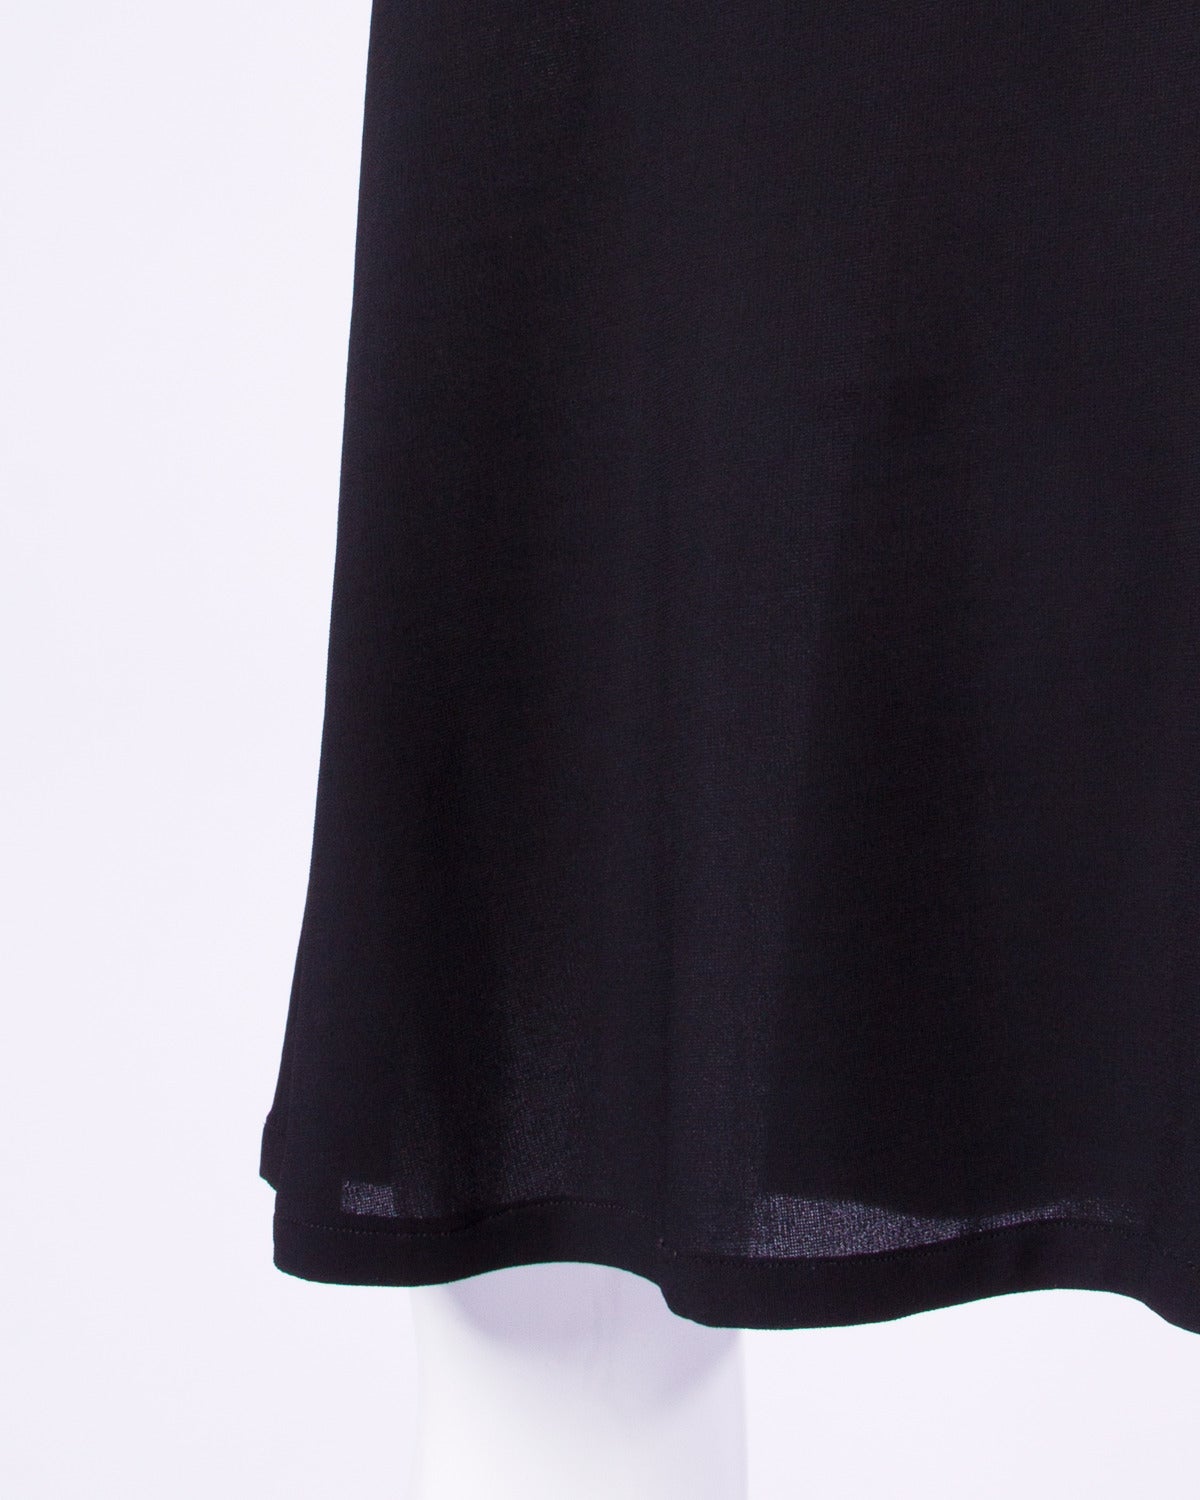 Moschino Couture! Cruise Me Baby Vintage One Shoulder Black Knit Dress In Excellent Condition For Sale In Sparks, NV